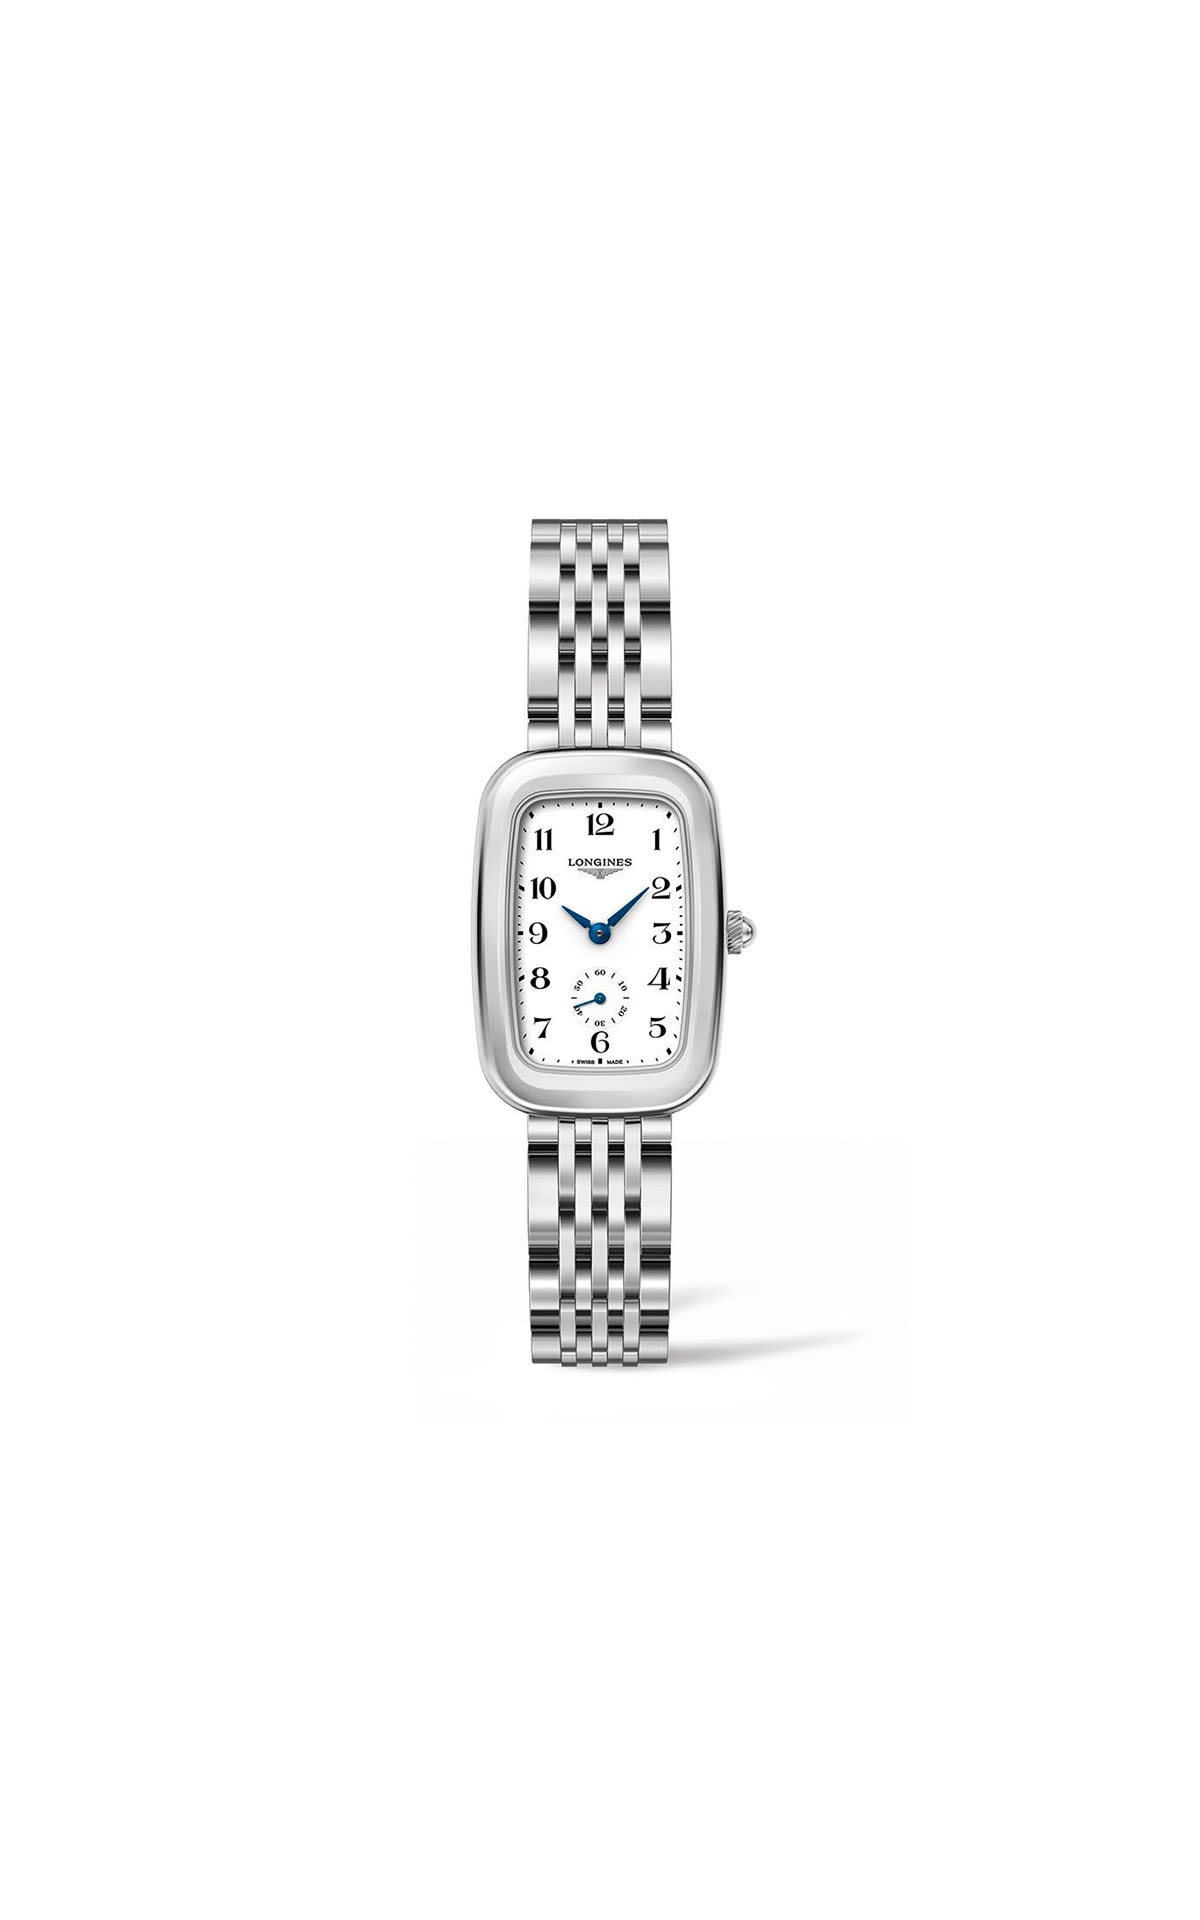 Hour Passion The Longines equestrian collection from Bicester Village